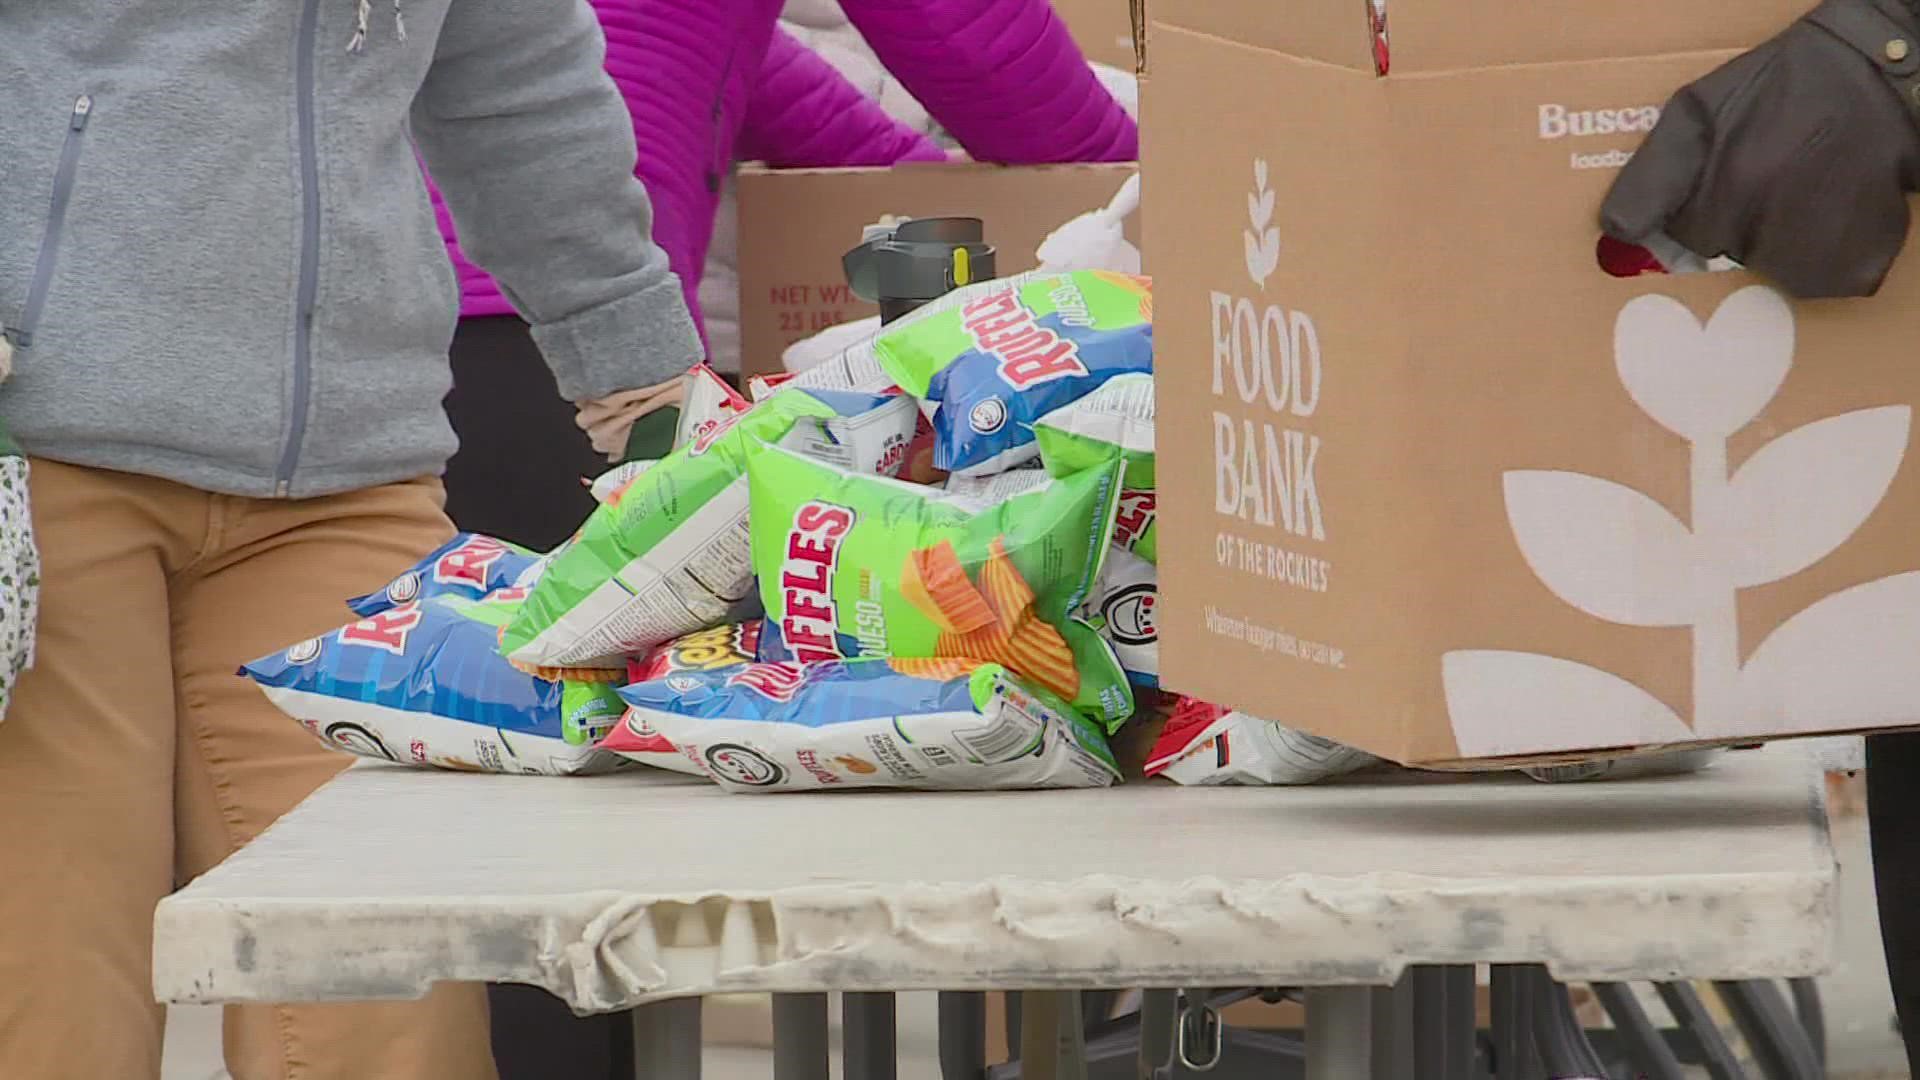 Our 9NEWS reporter Jordan Chavez takes a look at how rising inflation affects food insecurity in Colorado.